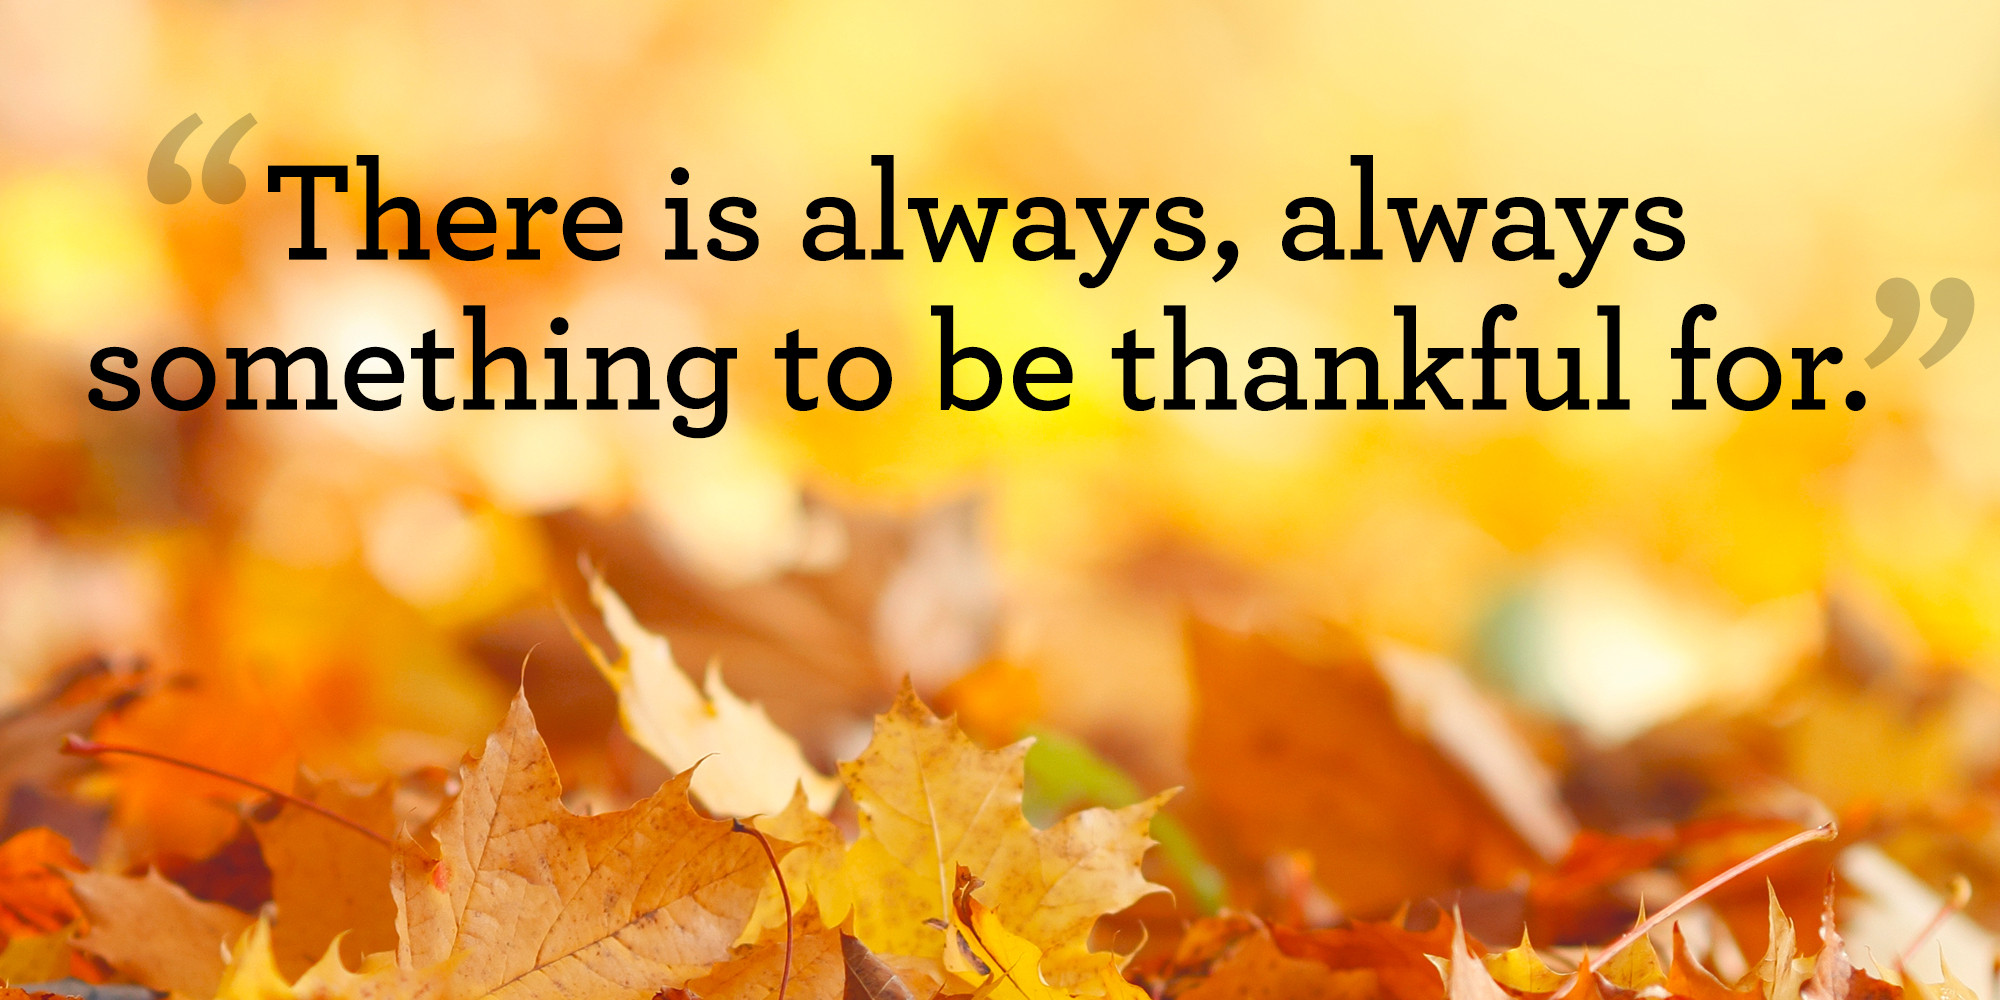 Thanksgiving Pictures And Quotes
 10 Best Thanksgiving Quotes Meaningful Thanksgiving Sayings